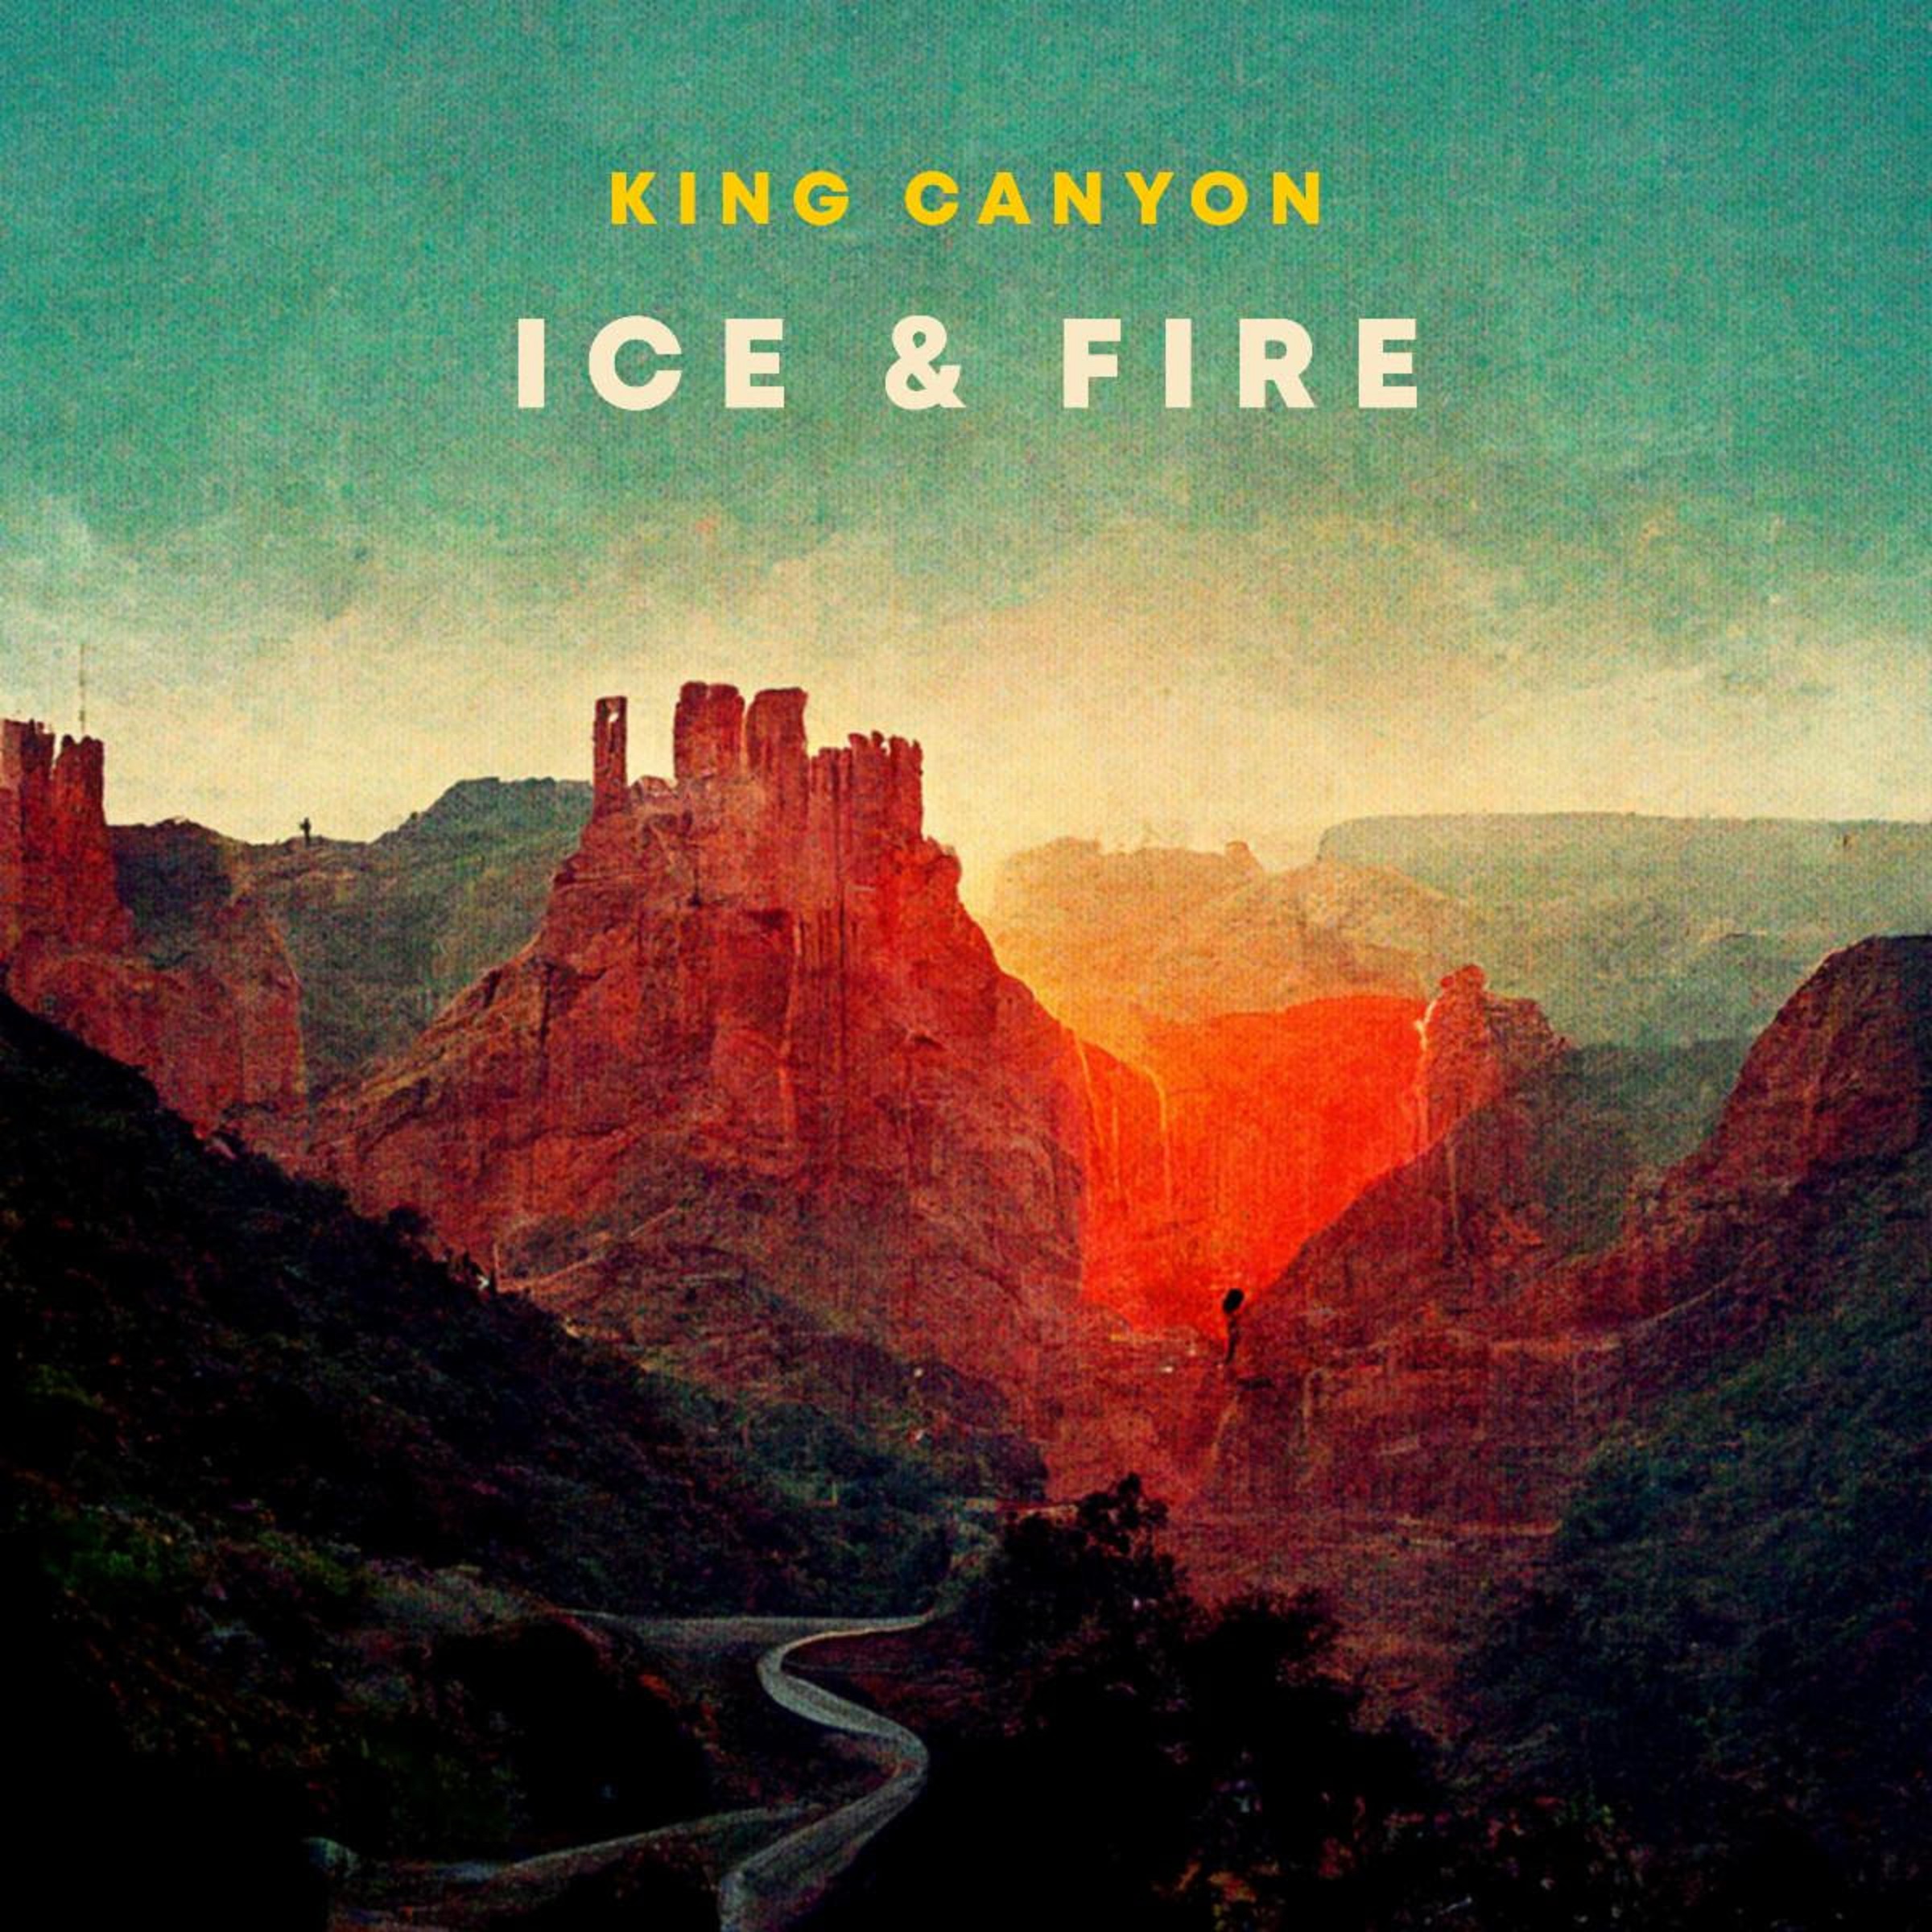 Eric Krasno's King Canyon Drop New Single "Ice & Fire" ft. Son Little